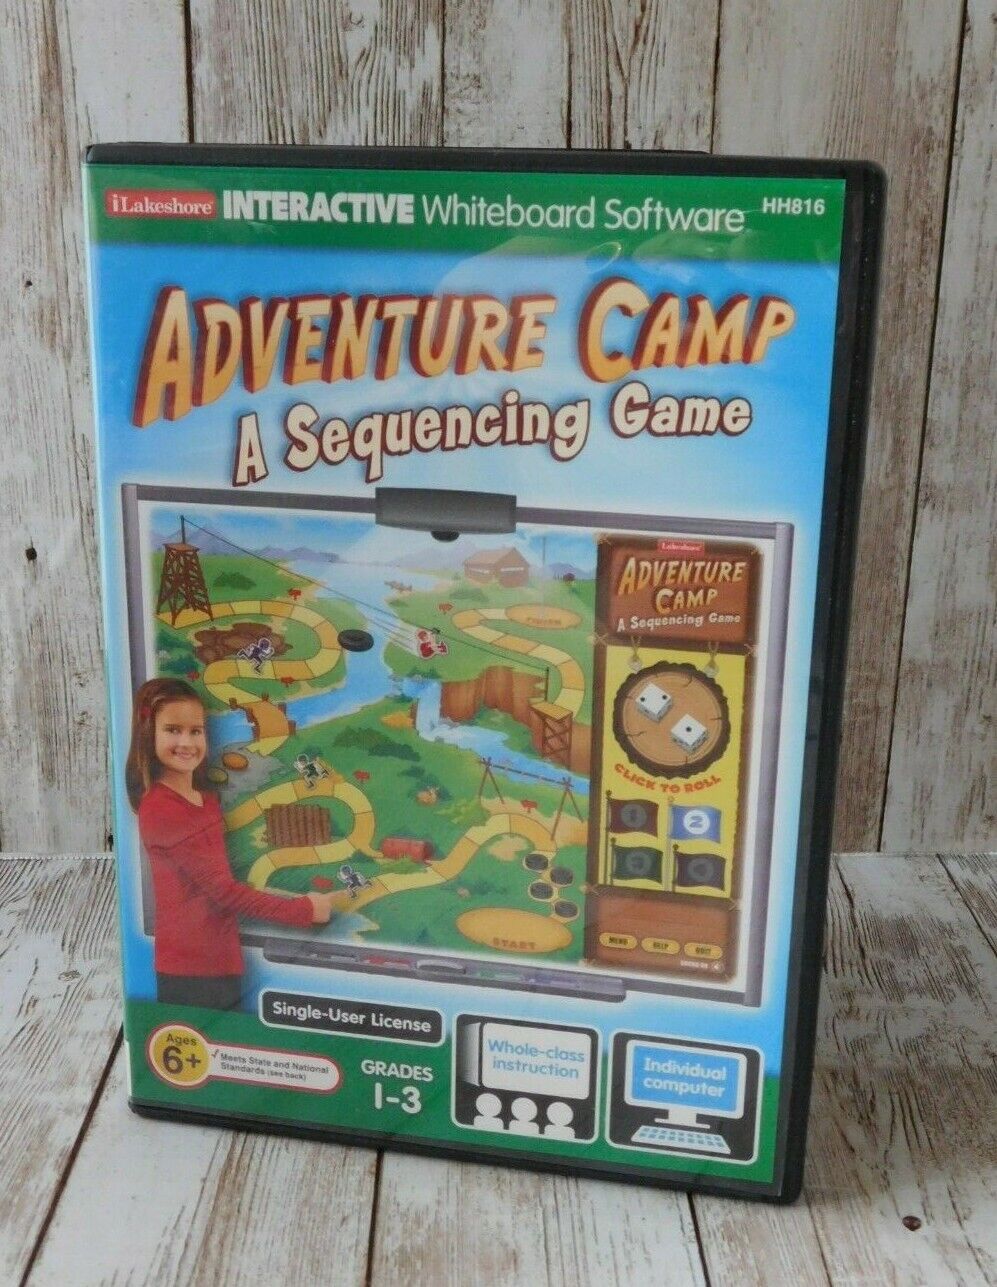 Lakeshore iLakeshore Interactive Whiteboard Software Adventure Camp Sequencing